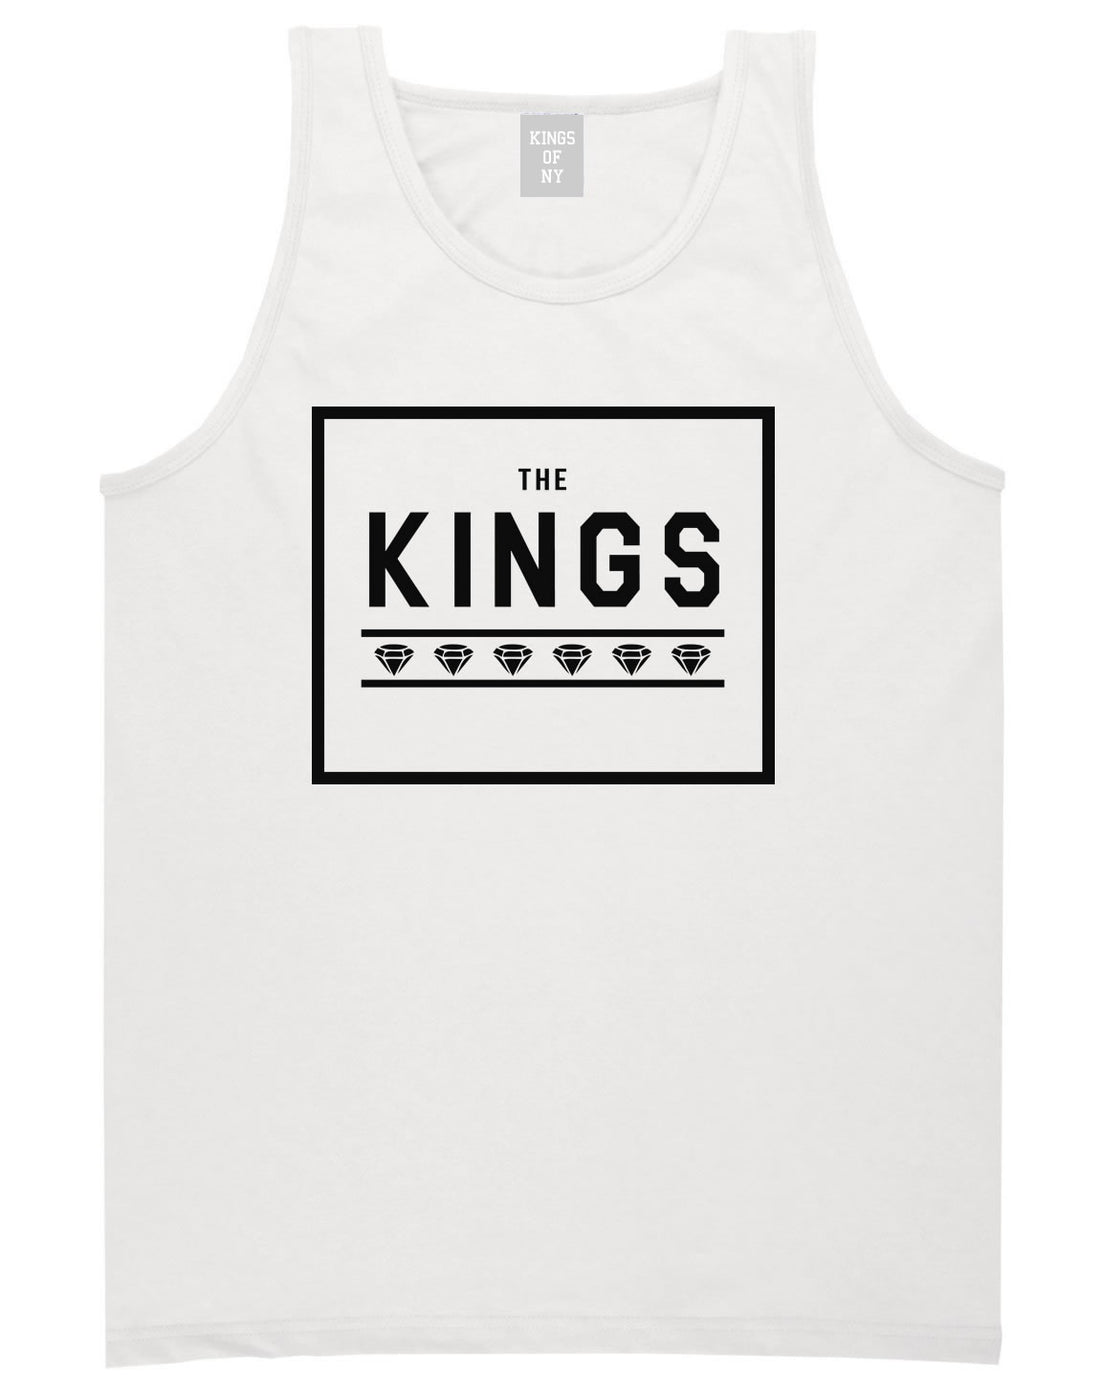 The Kings Diamonds Tank Top in White by Kings Of NY